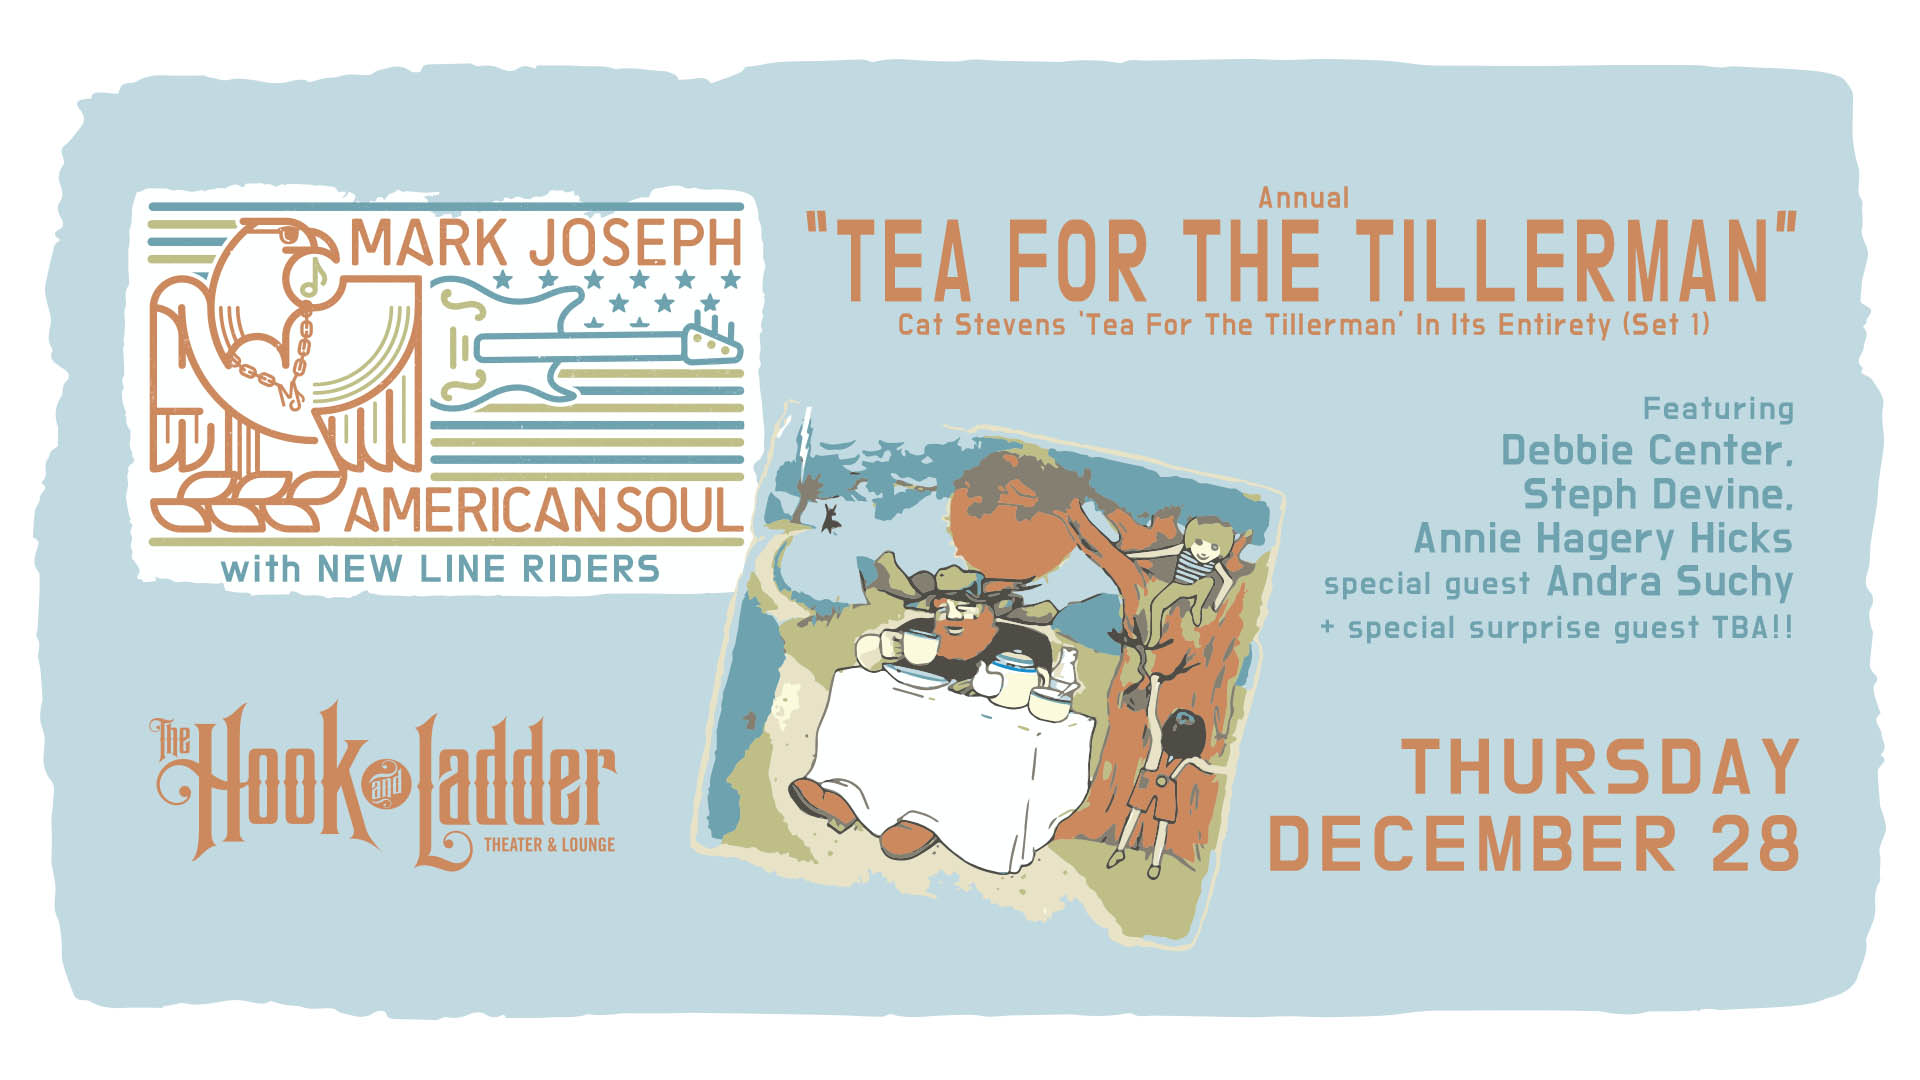 Mark Joseph's Annual 'Tea For The Tillerman' Concert with guests New Line Riders Featuring Debbie Center, Steph Devine, Annie Hagery Hicks special guest Andra Suchy w/ special surprise guest TBA!! Thursday, December 28 at The Hook and Ladder Theater Doors 7pm :: Music 7:30pm :: 21+ Reserved Seats: $25/20